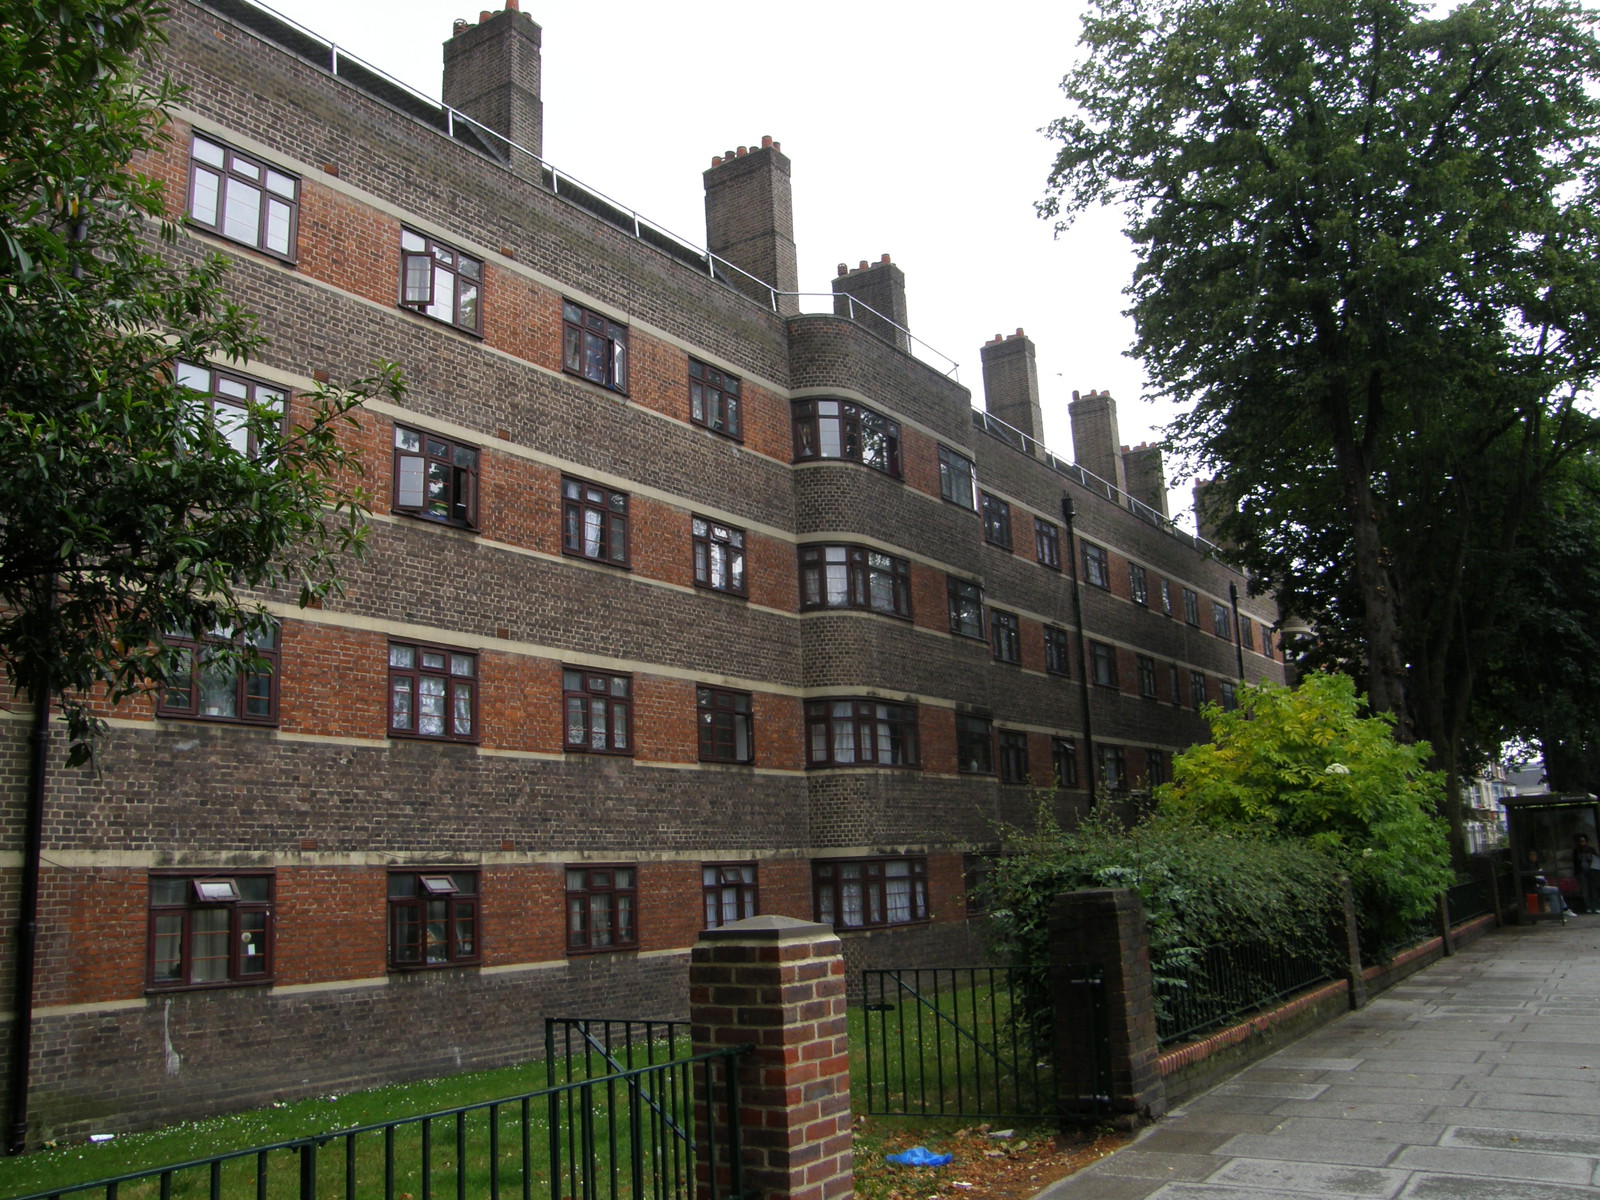 The estate on Poynders Road